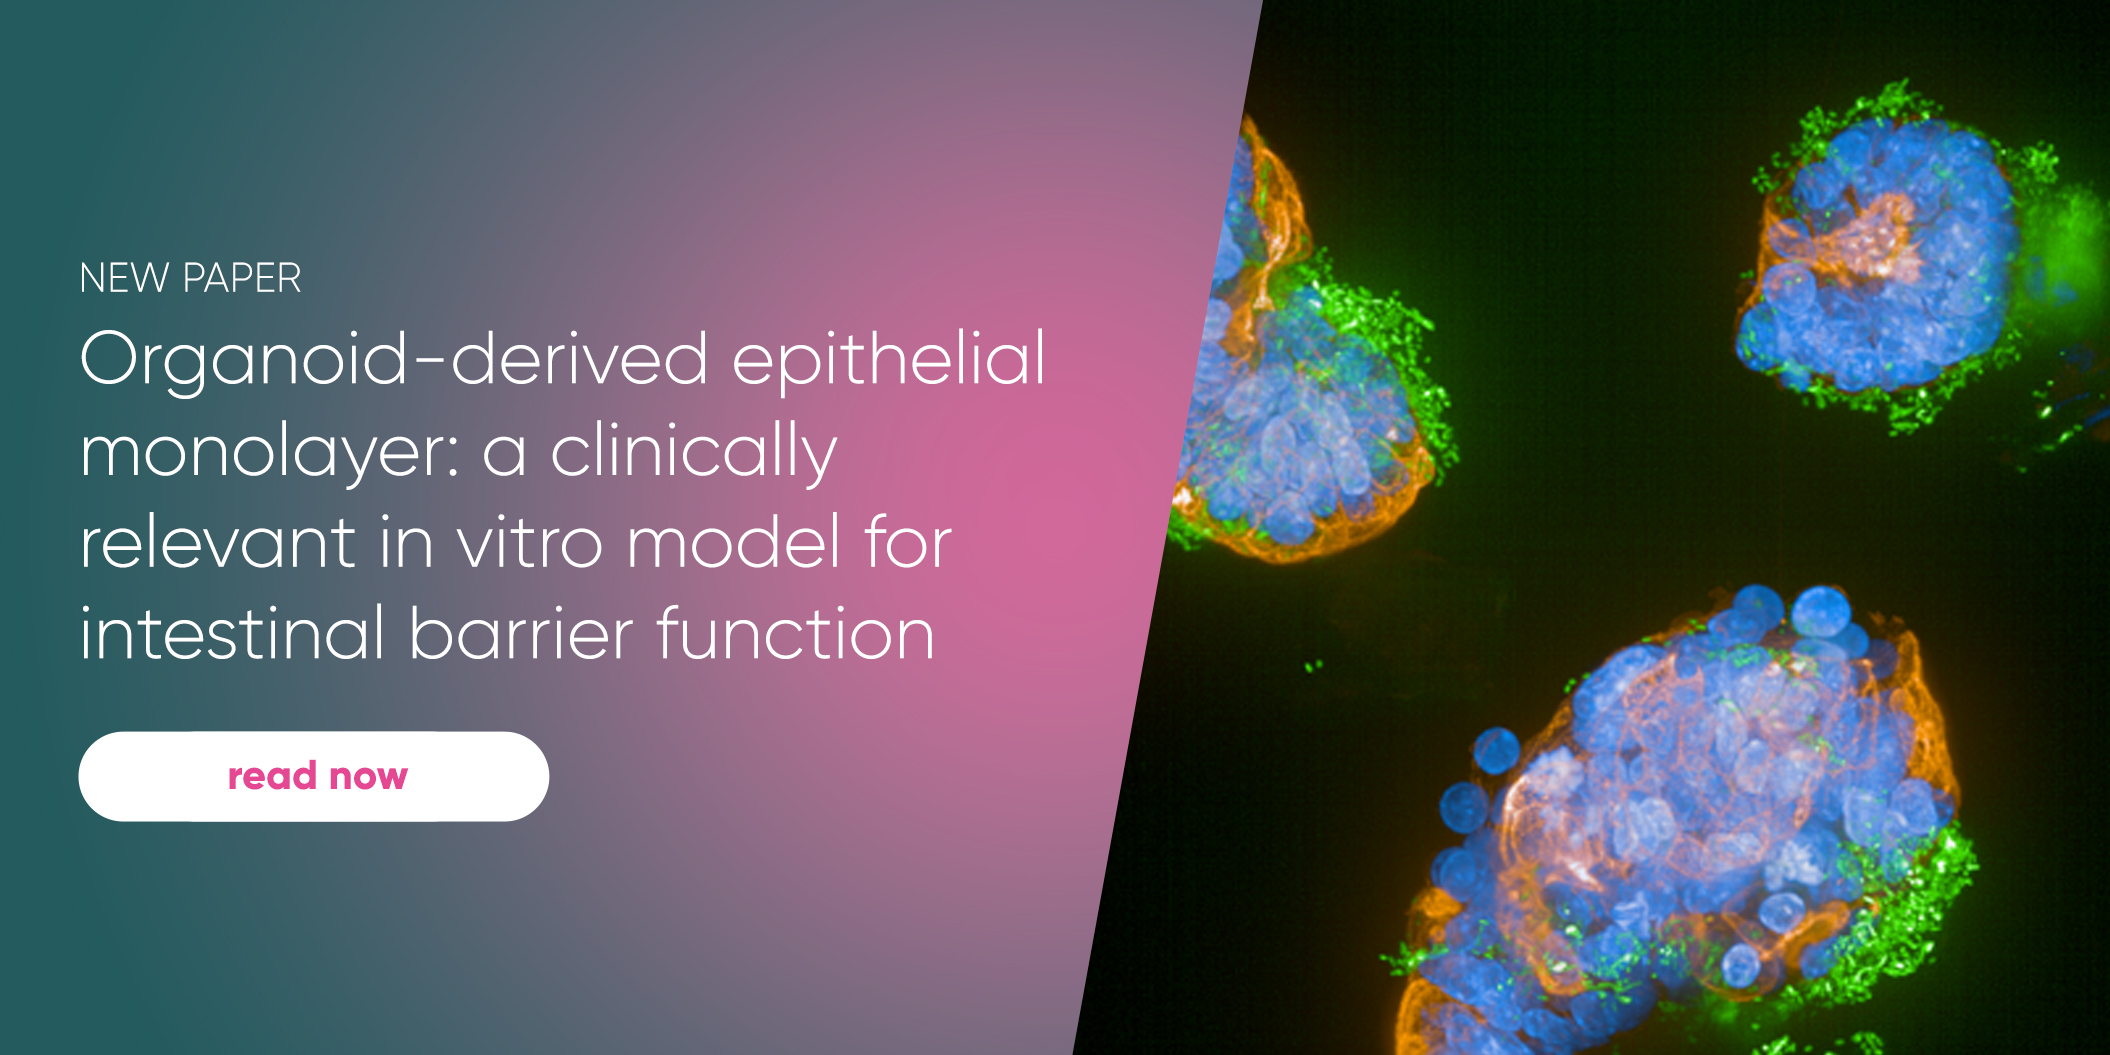 Organoid-Derived Epithelial Monolayer: A Clinically Relevant In Vitro Model for Intestinal